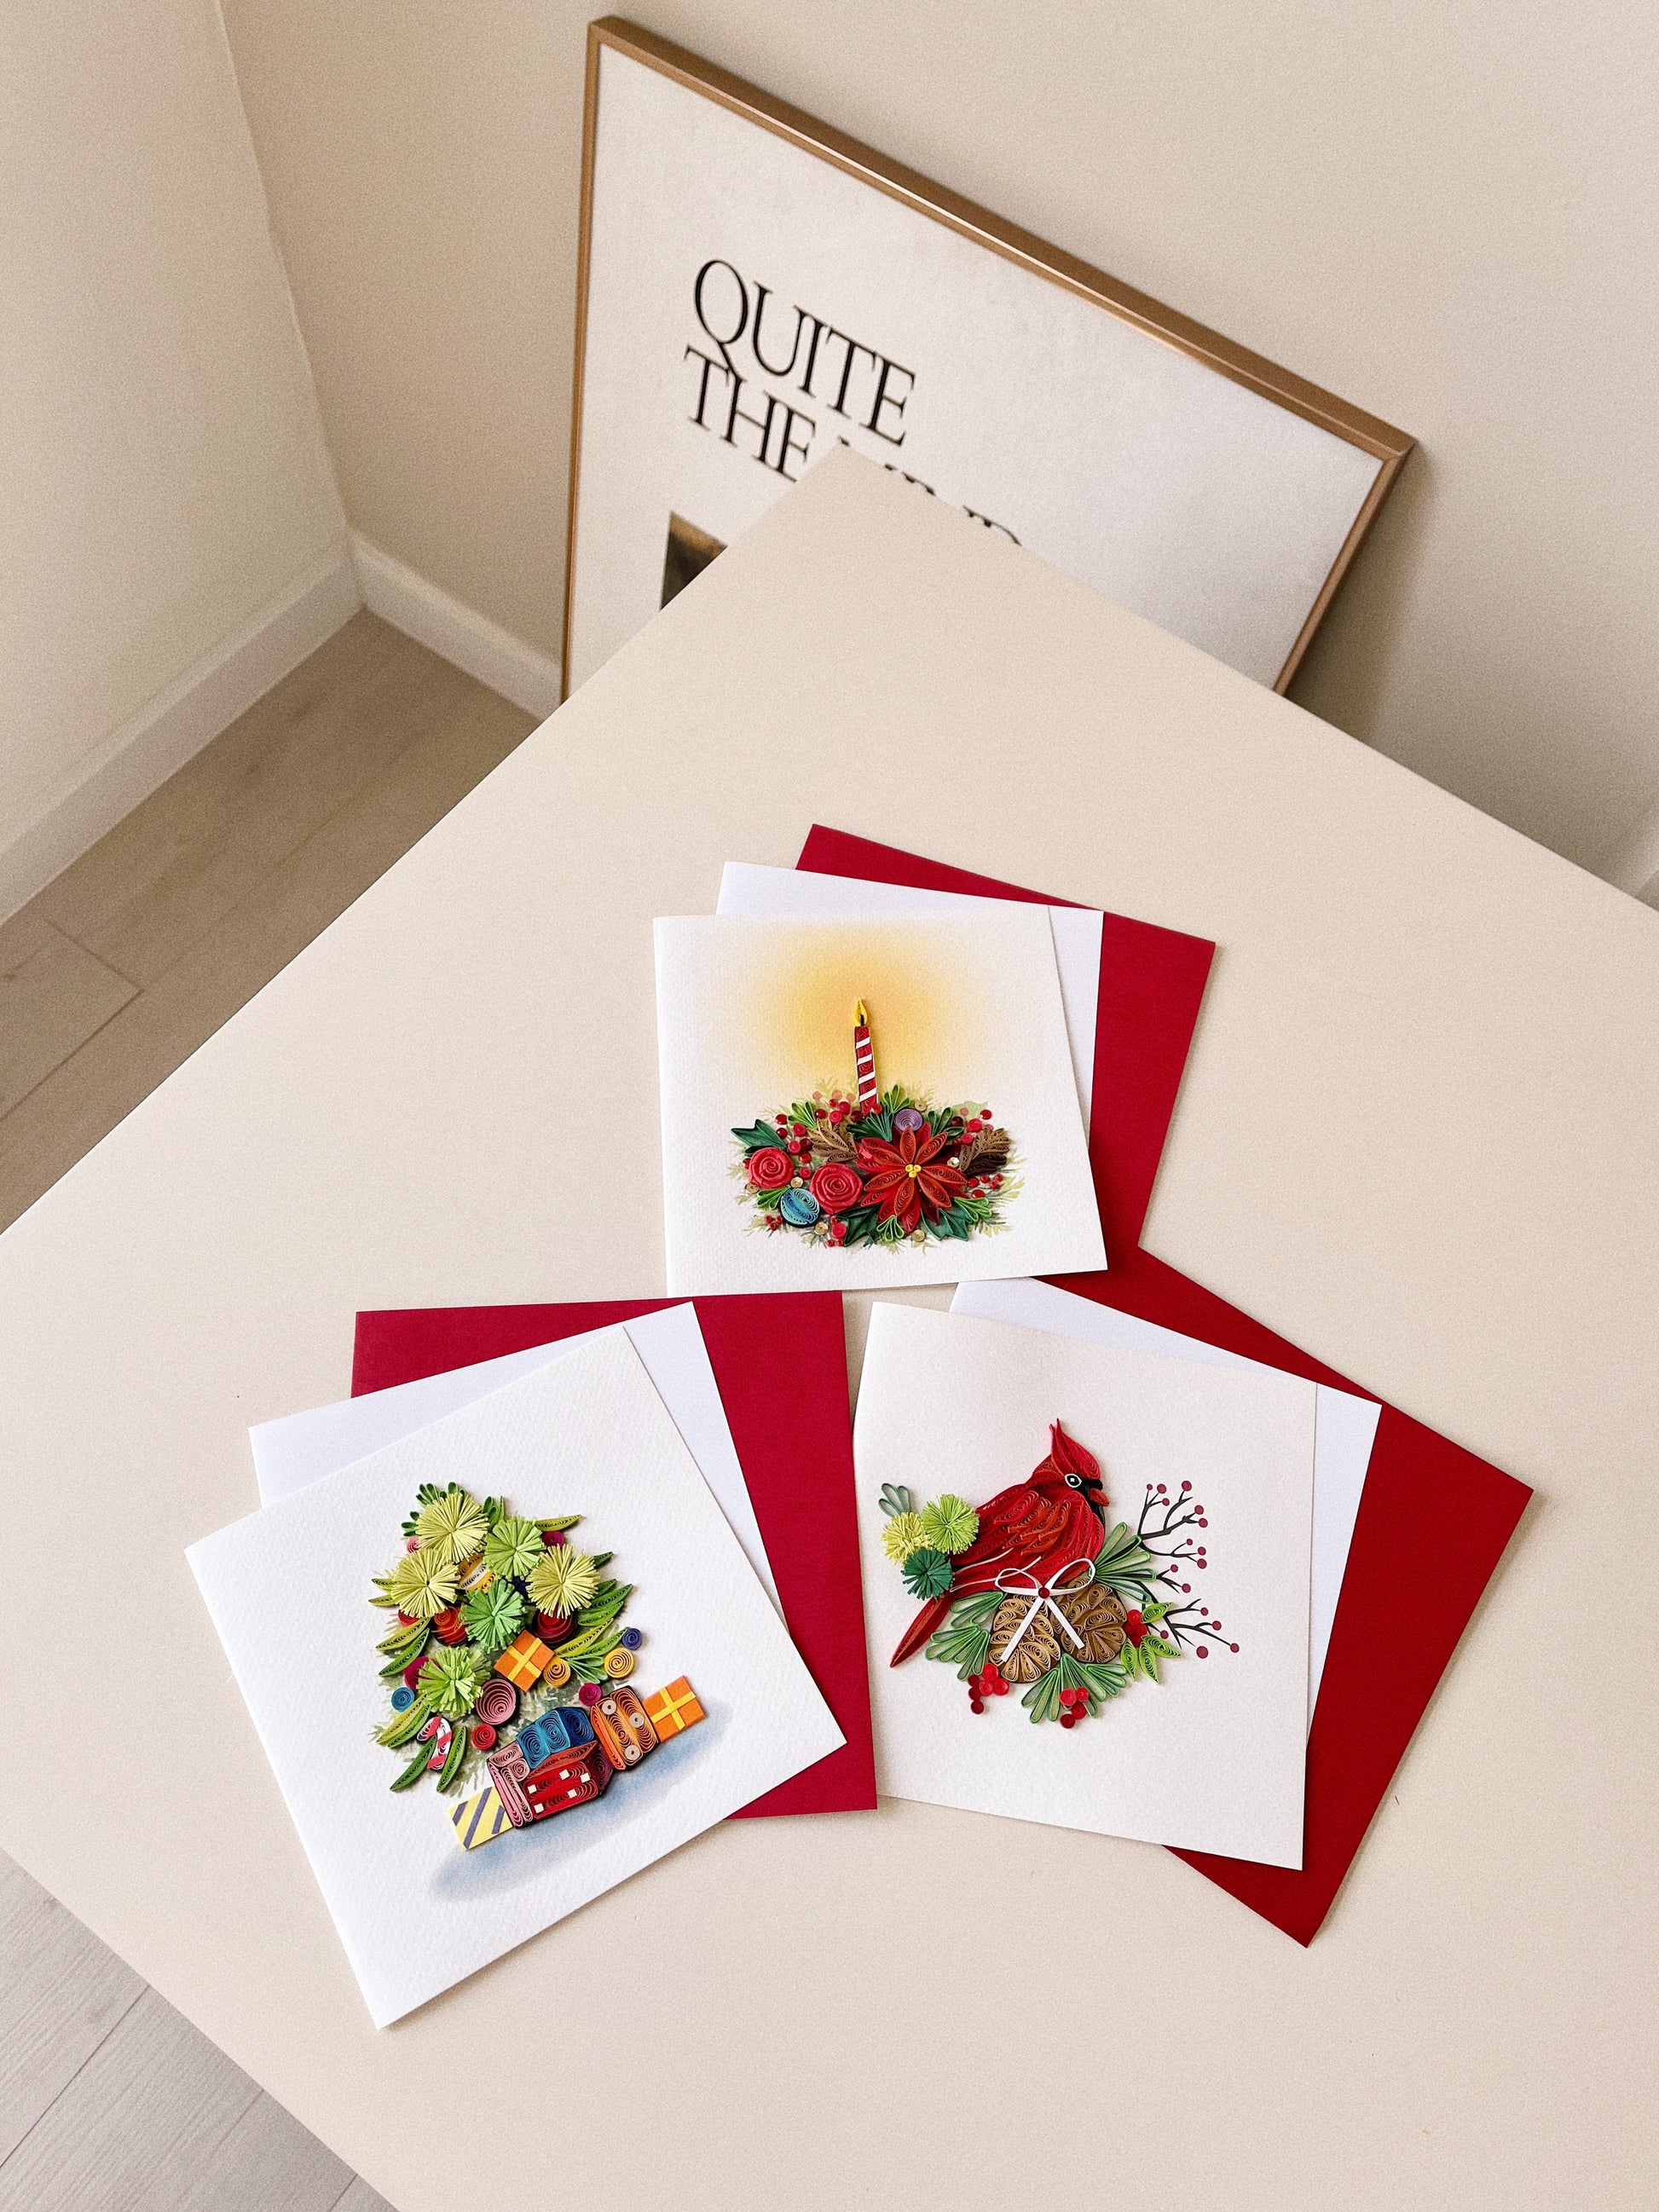 Red Cardinal Quilling Card